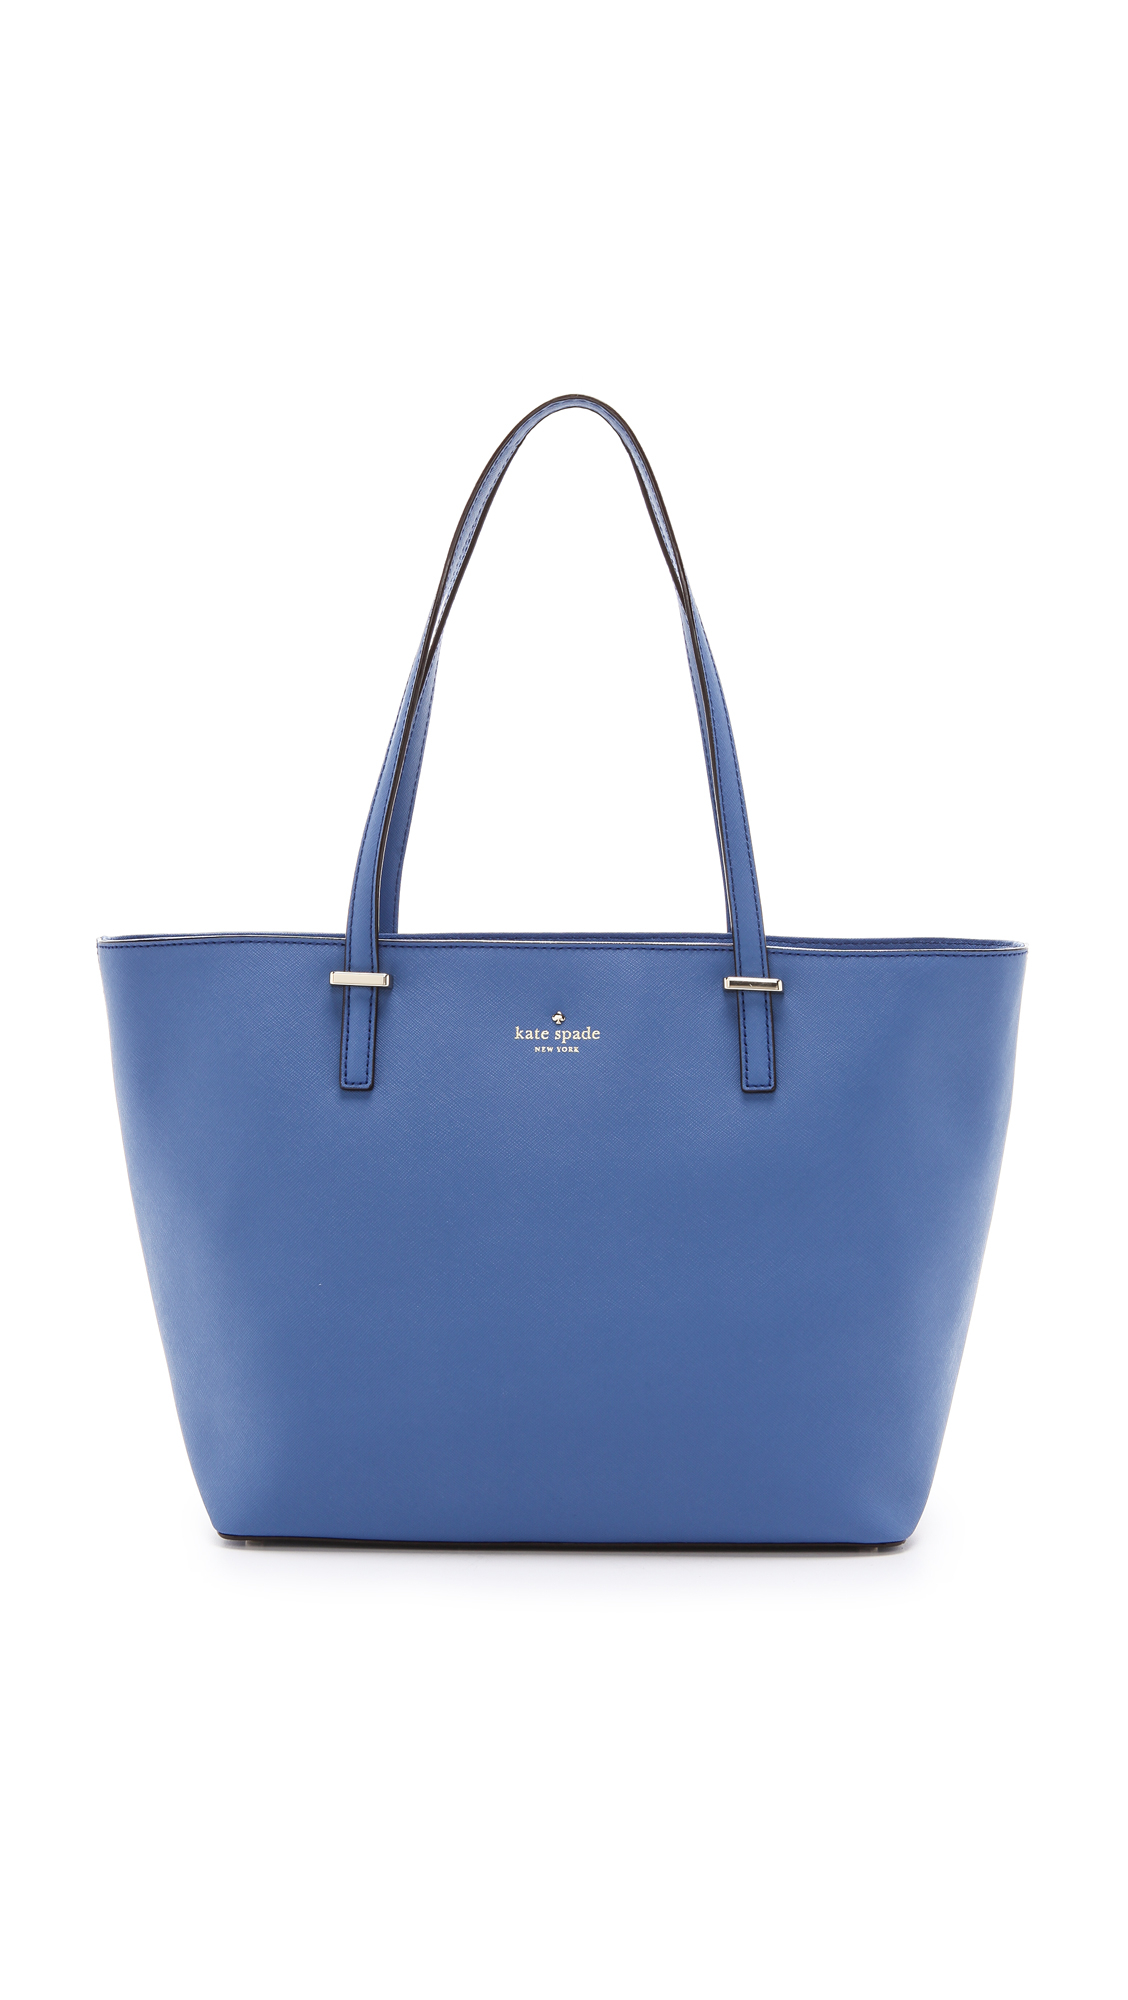 Lyst - Kate Spade Small Harmony Tote in Blue